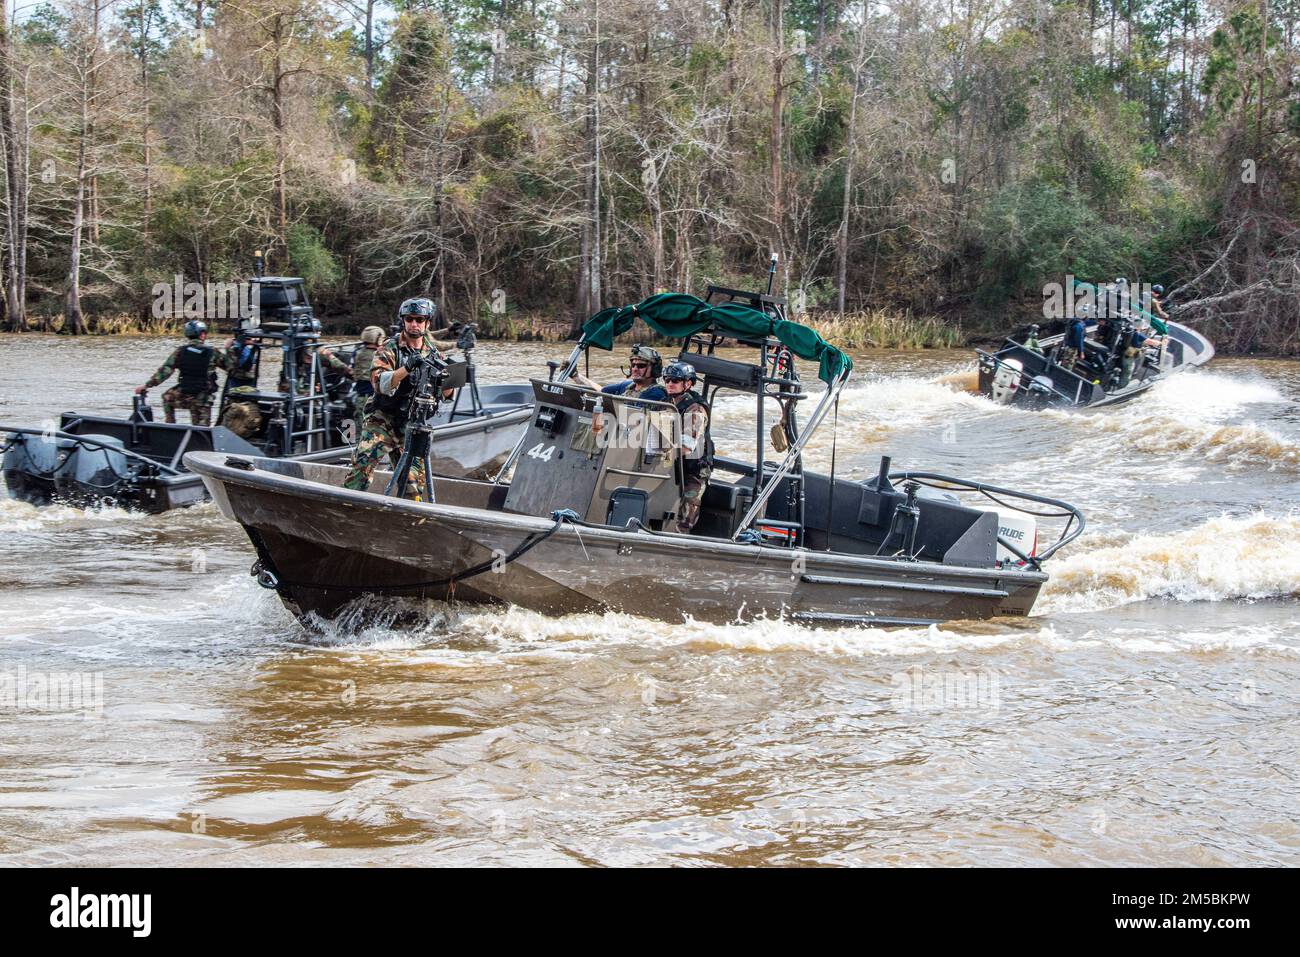 Naval Small Craft Instruction and Technical Training School (NAVSCIATTS) students from Estonia, Germany, Poland, and Romania participate in a Patrol Craft Officer Riverine (PCOR) training exercise on the Pearl River, near the John C. Stennis Space Center, Mississippi, February 22, 2022.    PCOR, is a seven-week course of instruction designed to provide international students with the knowledge and skills to operate a riverine patrol craft.    NAVSCIATTS is a Security Cooperation training command operating under U.S. Special Operations Command in support of Security Force Assistance and Geograp Stock Photo